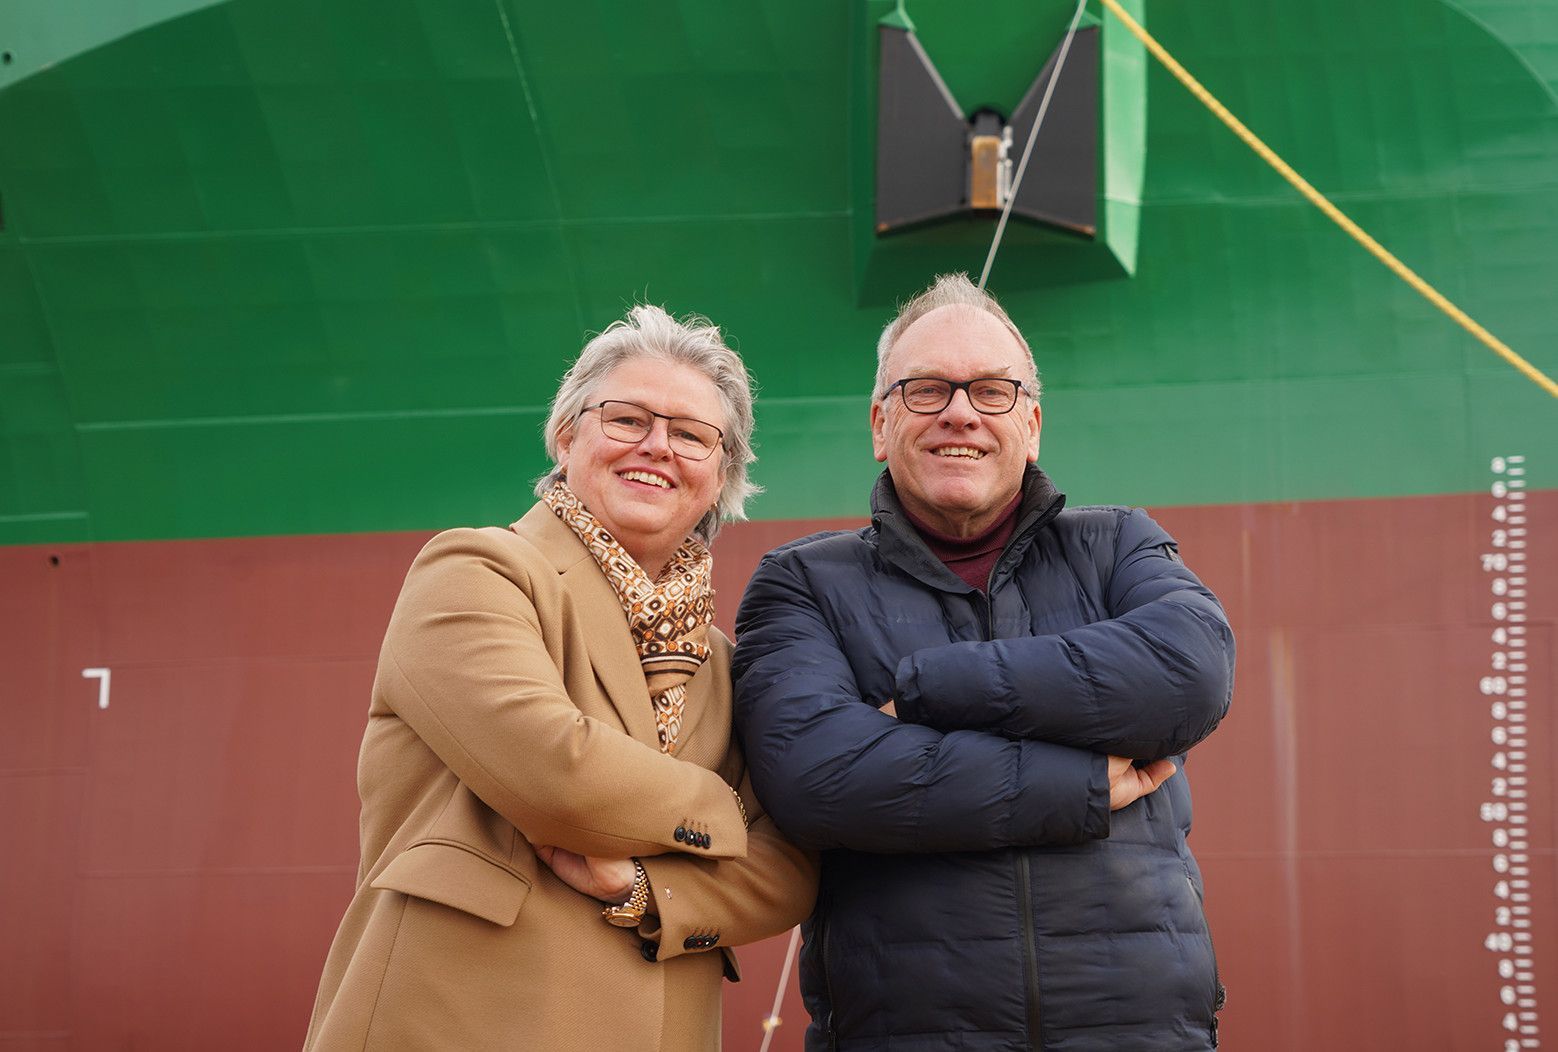 MF Shipping Group CEO Karin Orsel and CFO Theo Dik